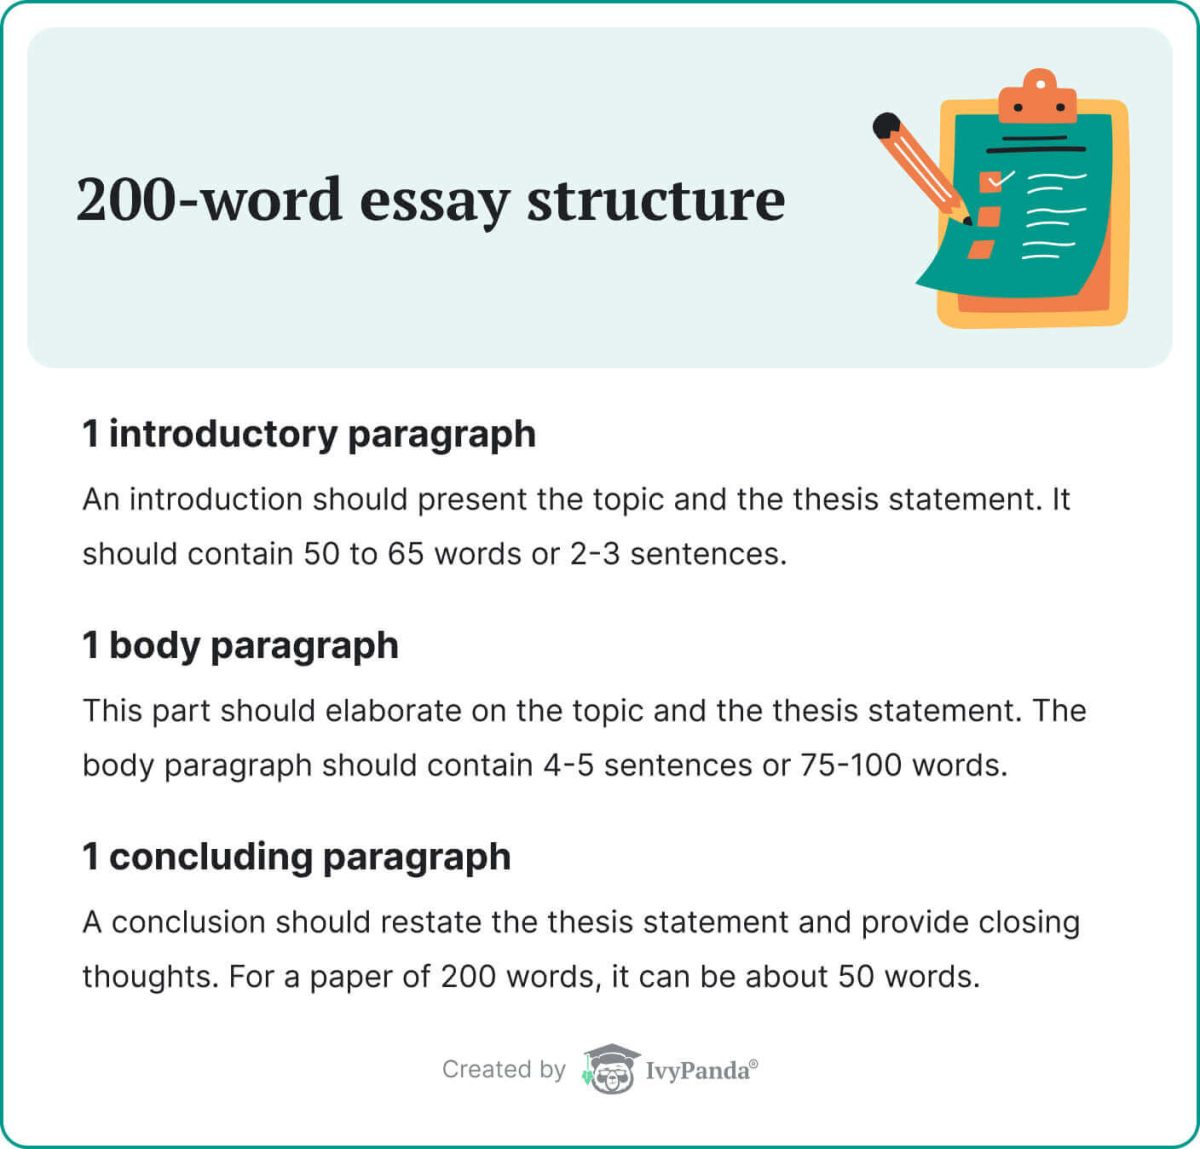 This image shows the 200-word essay structure.